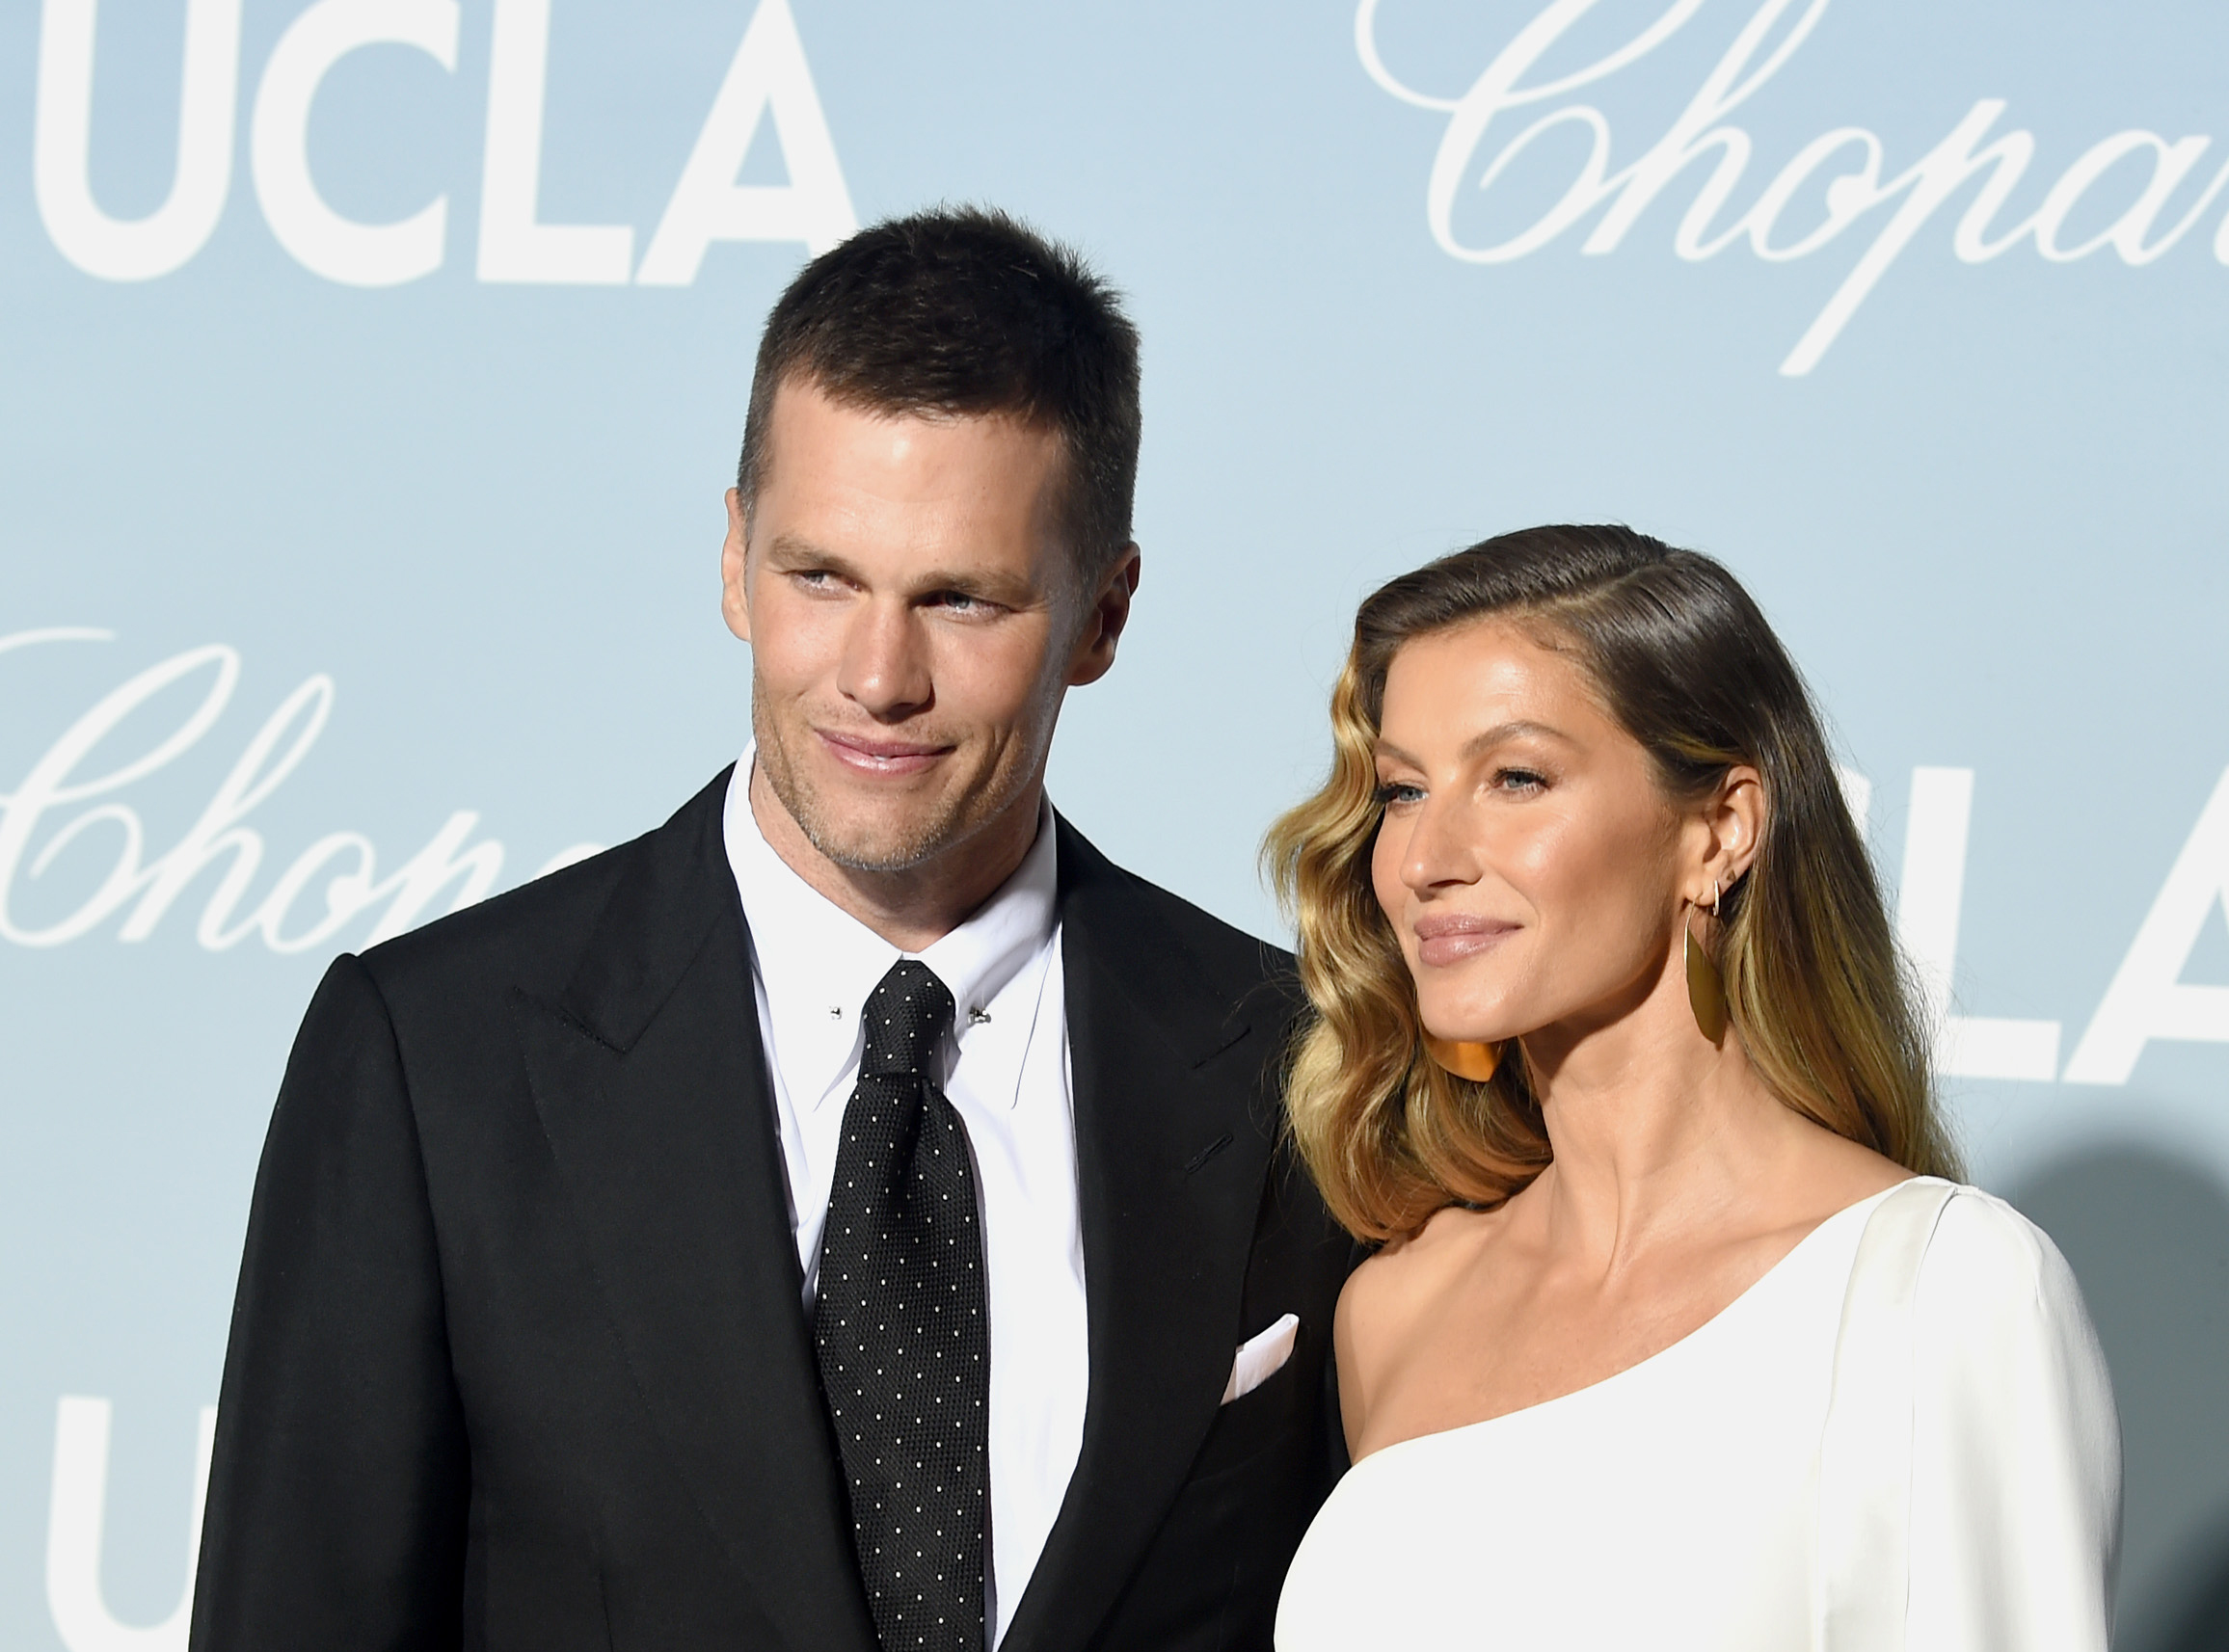 Gisele Bundchen Leaves Supportive Comment On Tom Brady’s Post About Son Jack 1 Month After Divorce